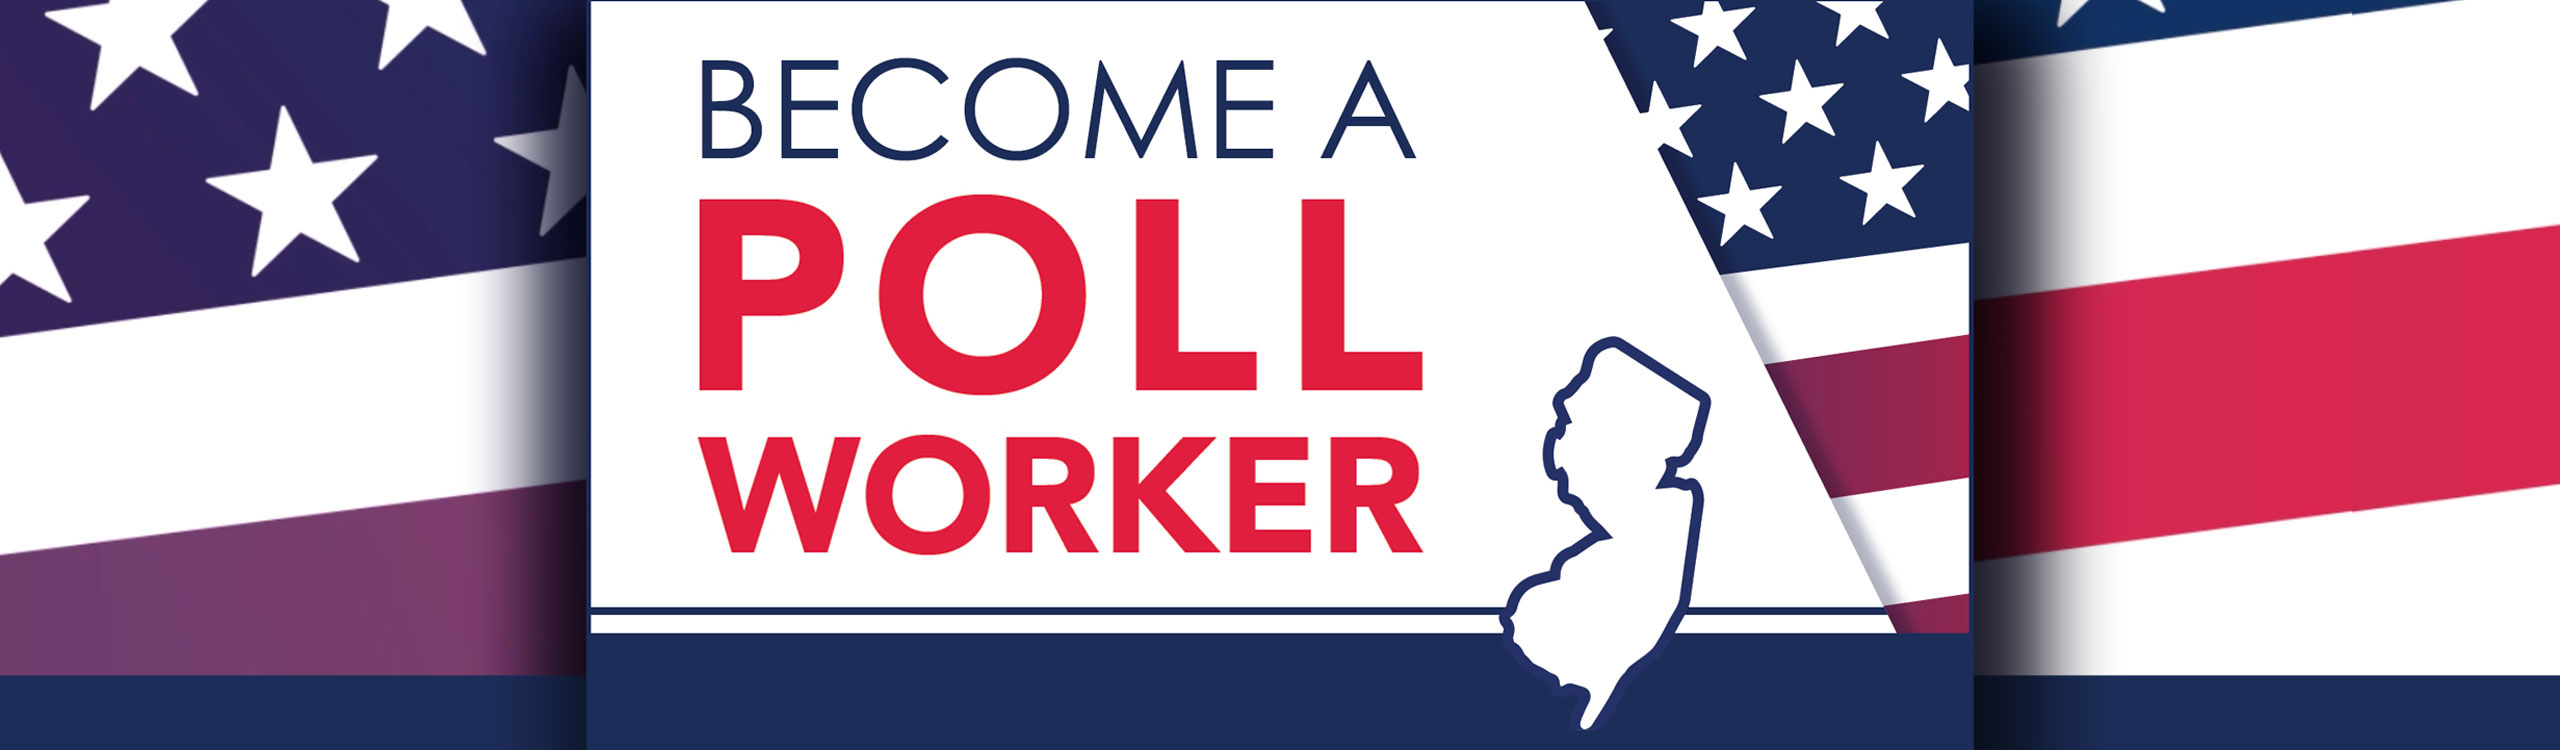 Become a Poll Worker for the Ocean County Board of Elections